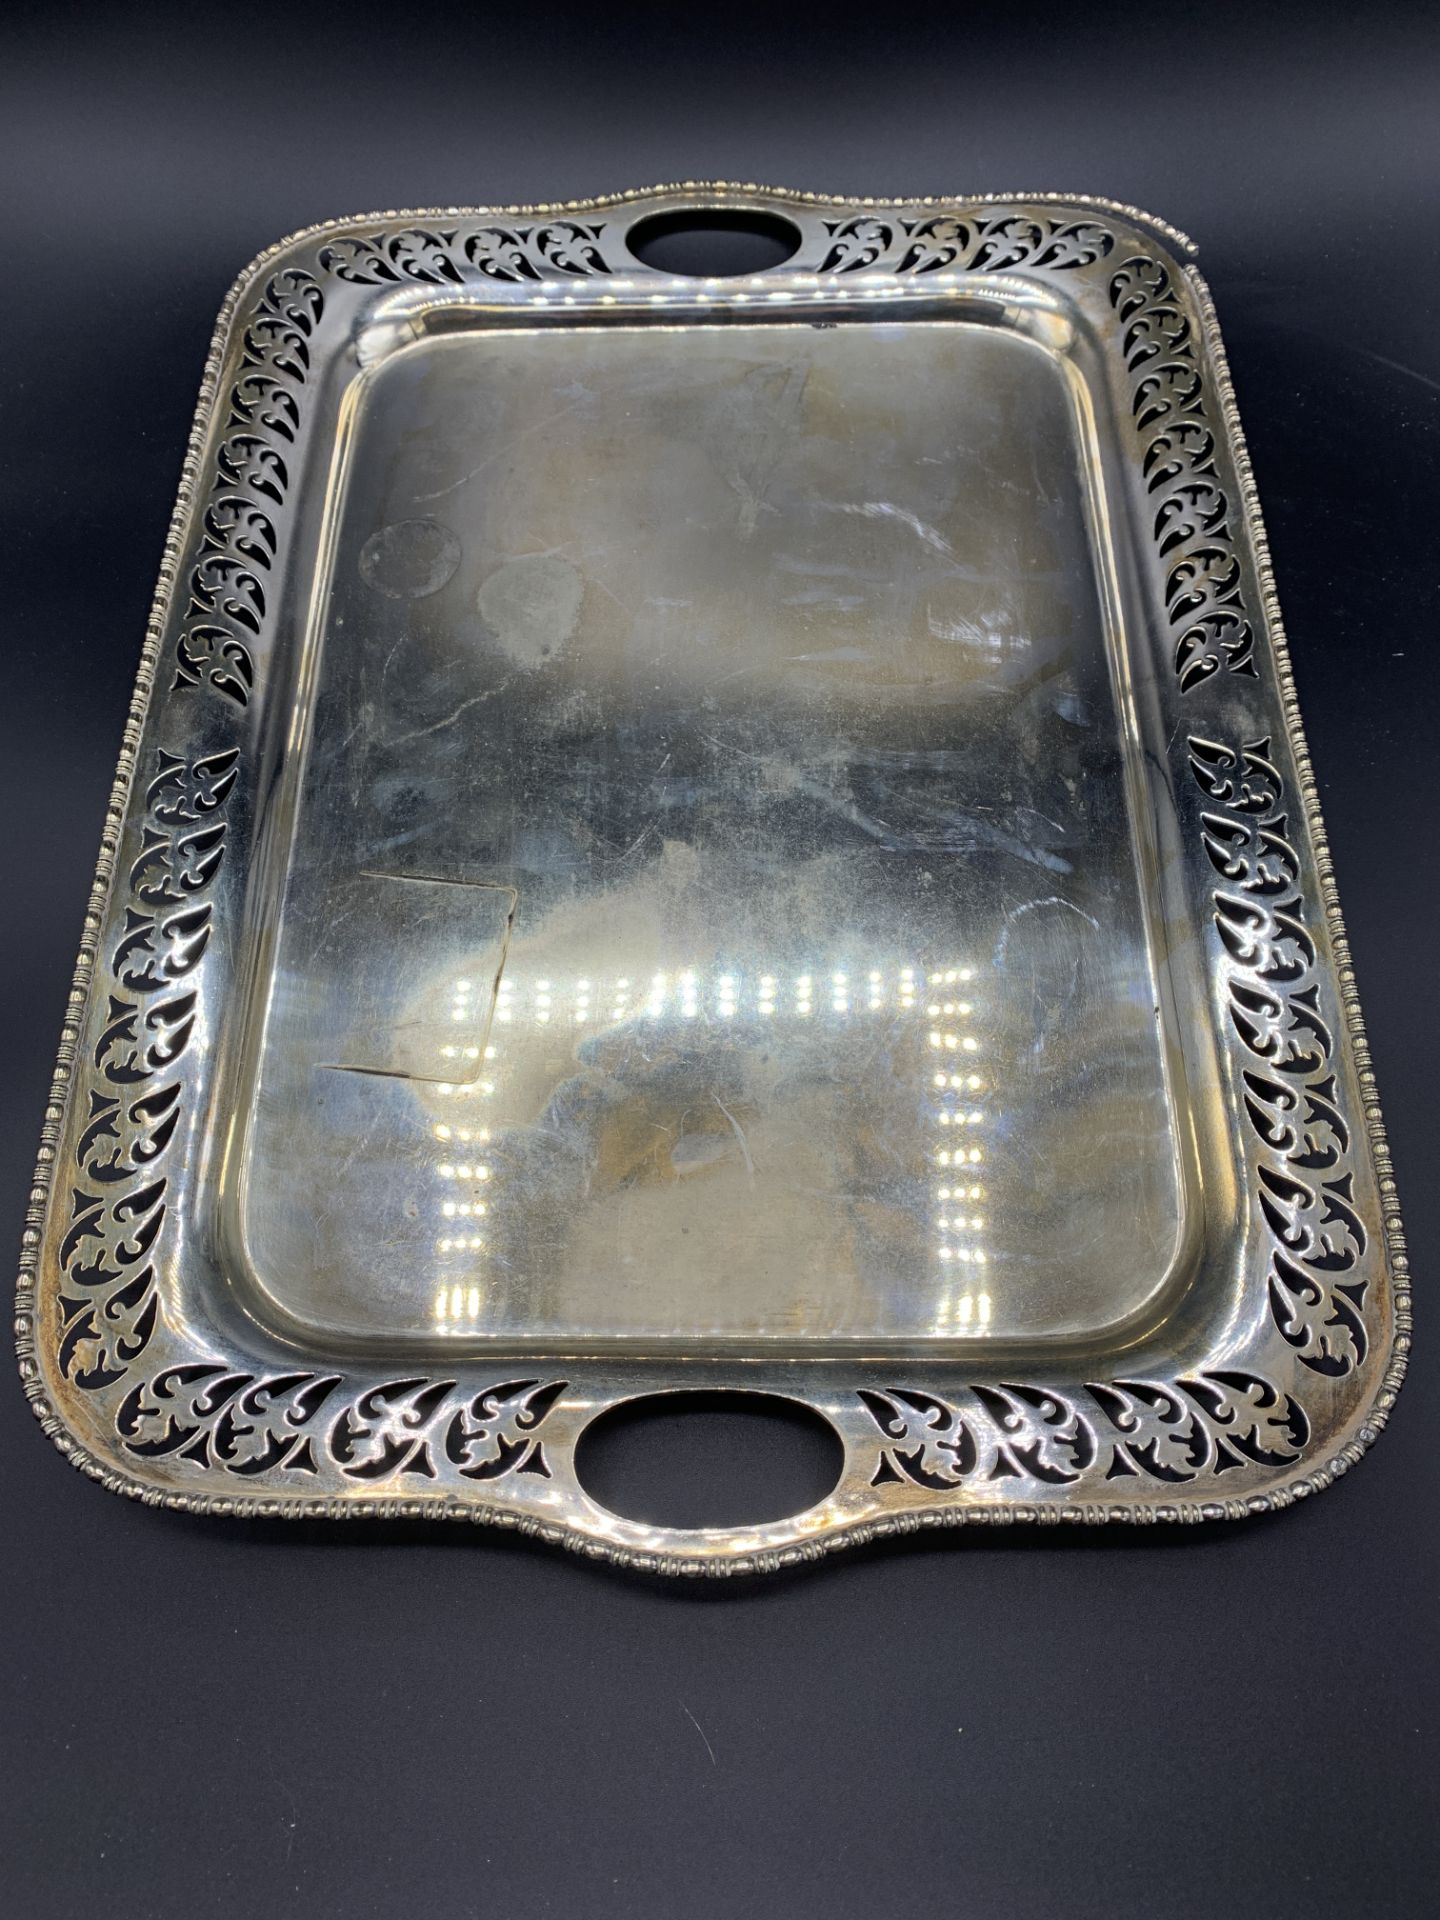 Quantity of silver plate